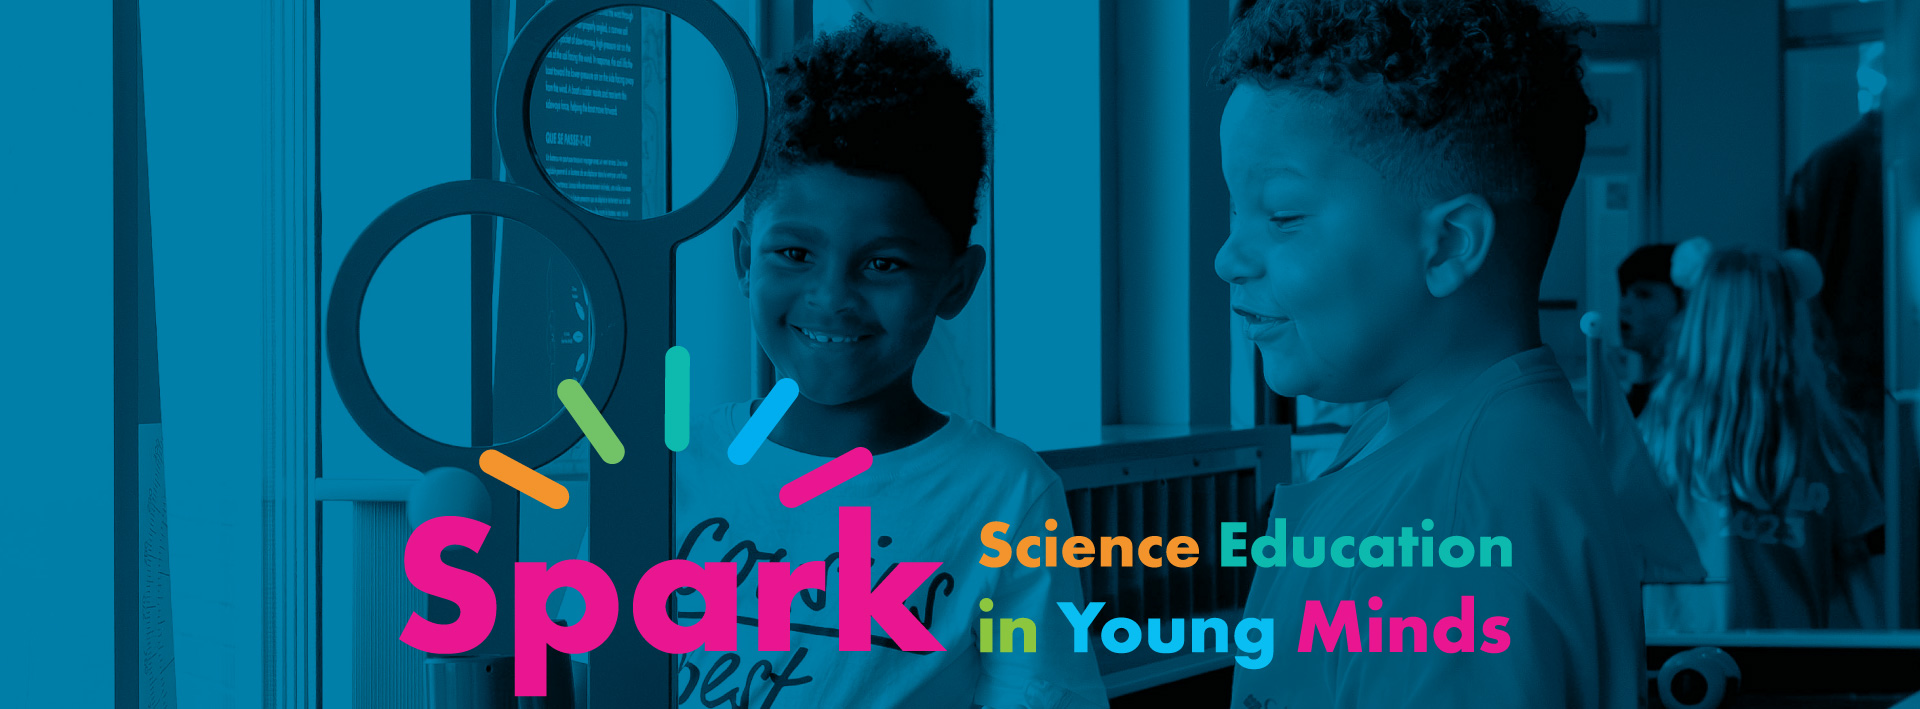 Spark: Science Education in Young Minds